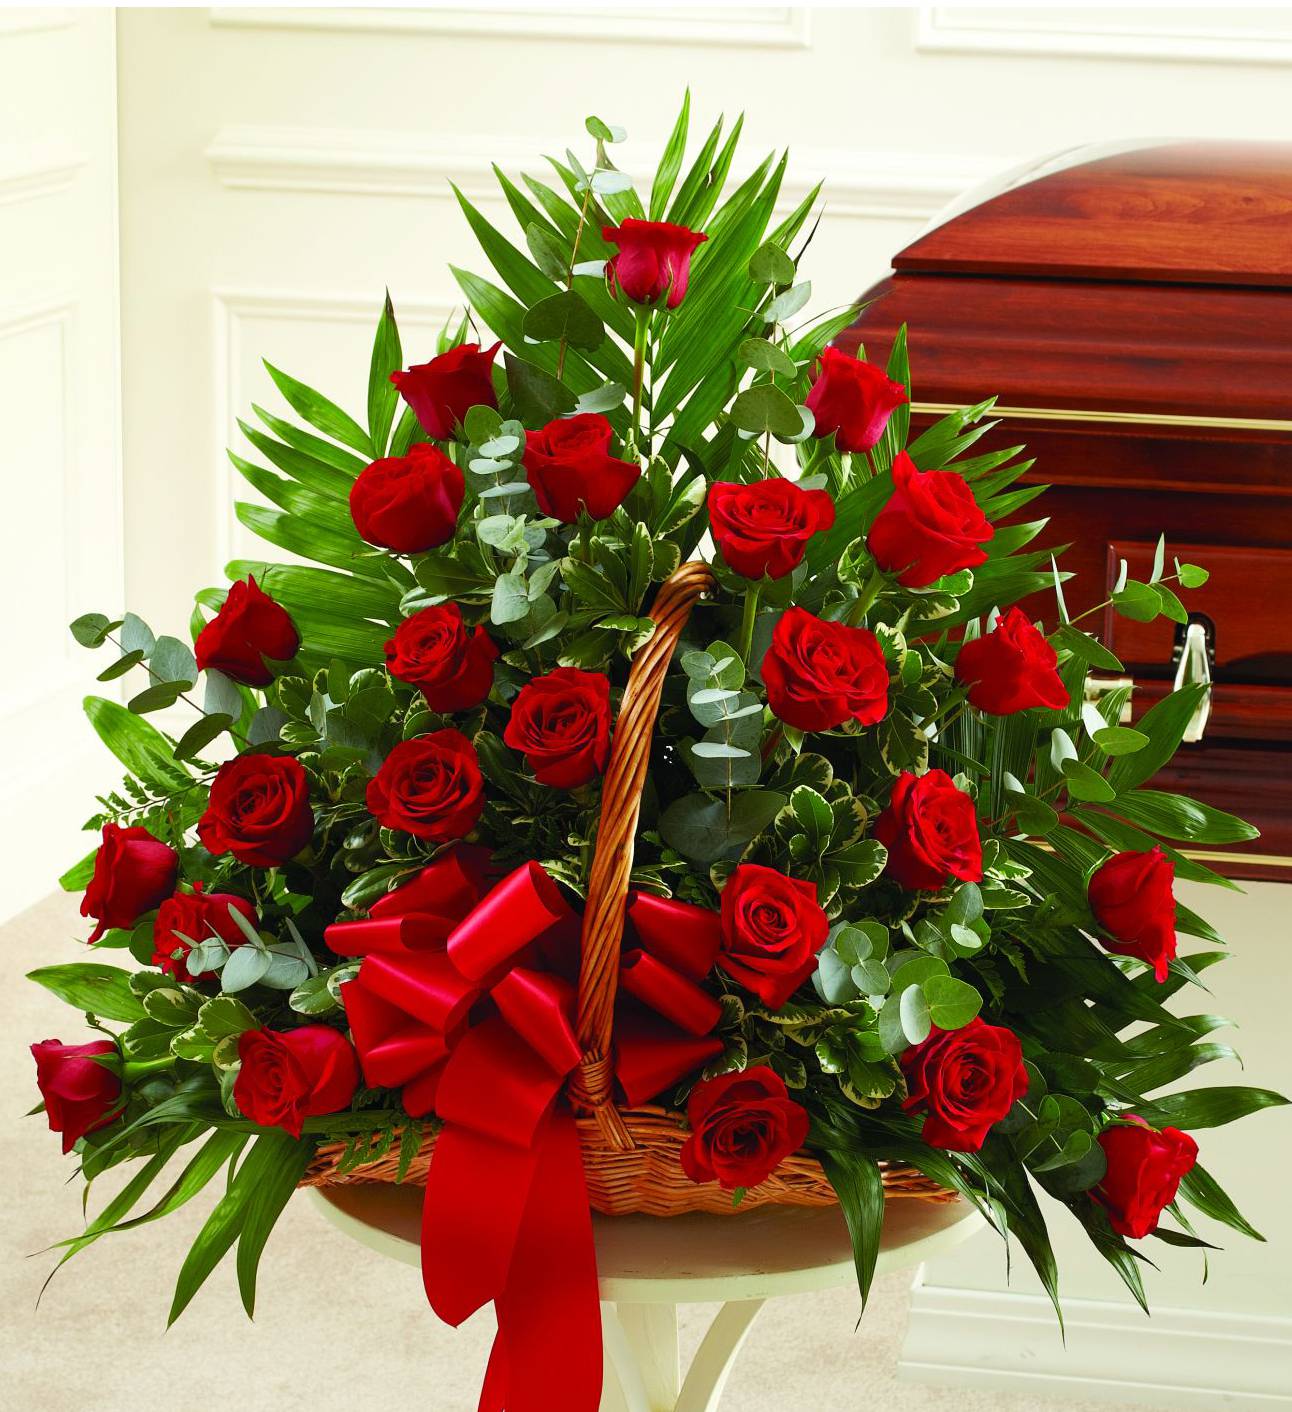 Red Sympathy Fireside Basket - Our Red Sympathy Fireside Basket is an elegant arrangement of stunning red roses. Designers will create a lovely one-sided arrangement that will display beautifully, and extend your most heartfelt condolences. 